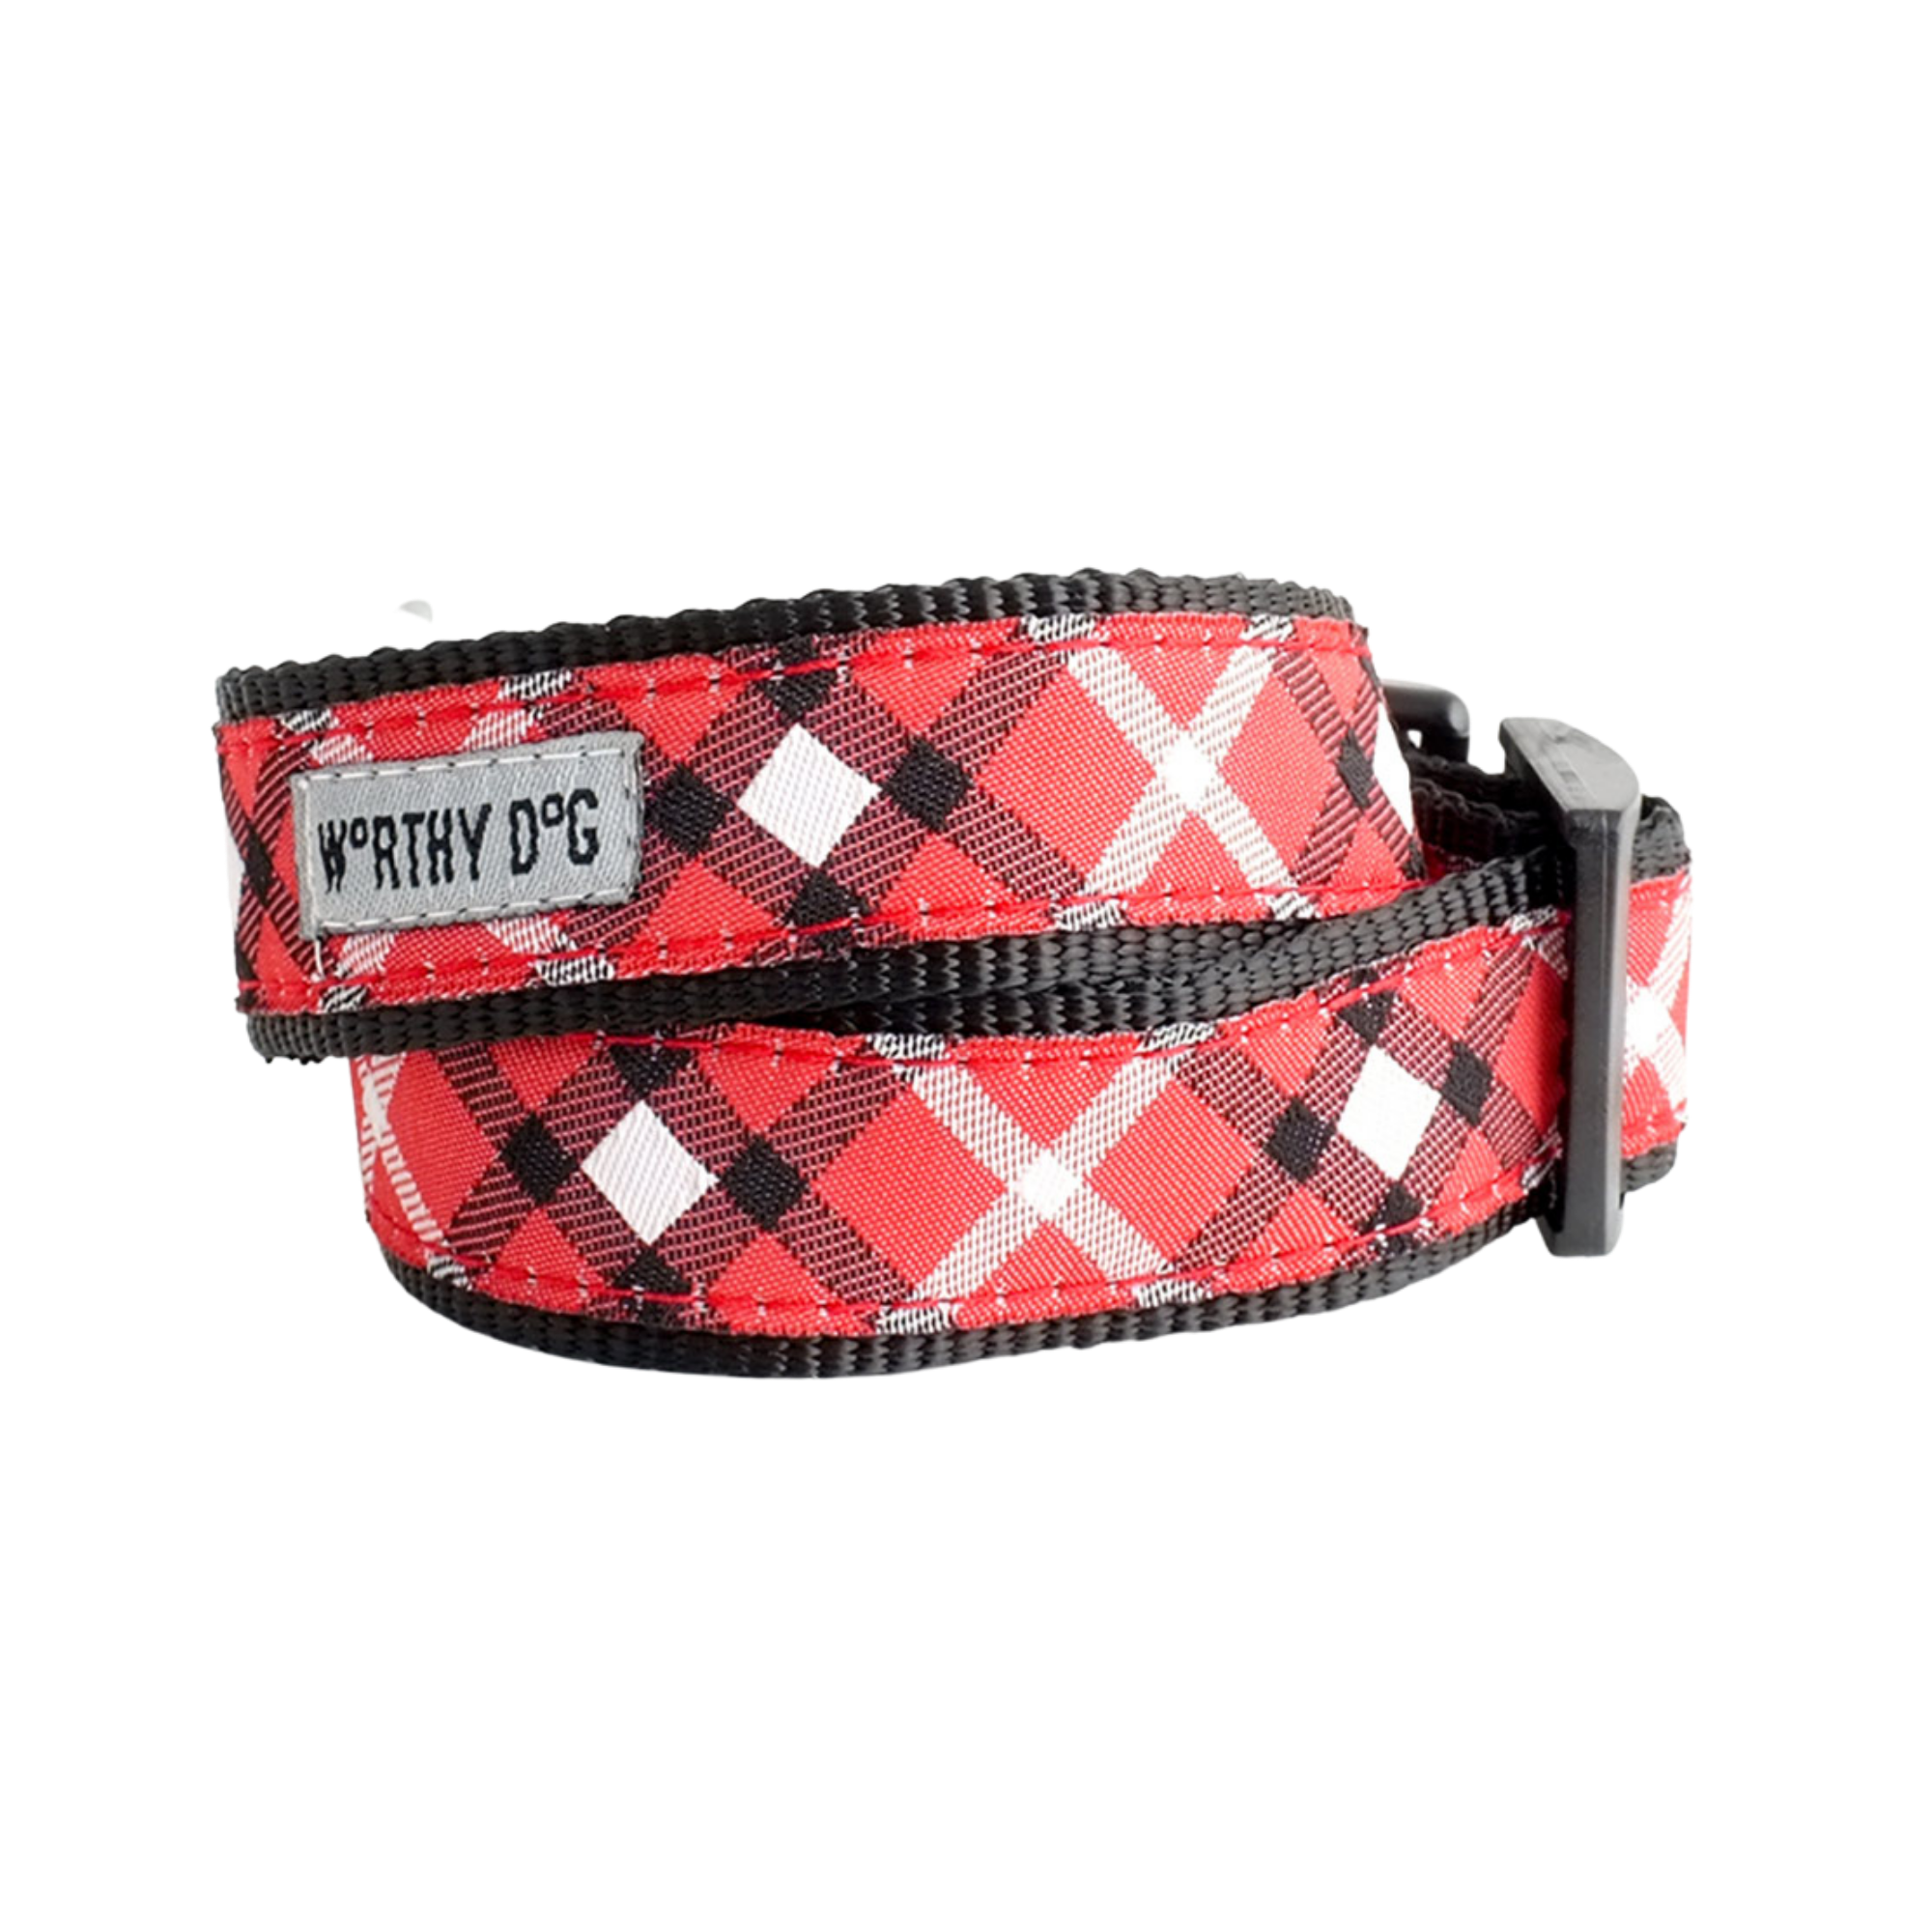 The Worthy Dog Bias Plaid Red Dog Collar - Mutts & Co.